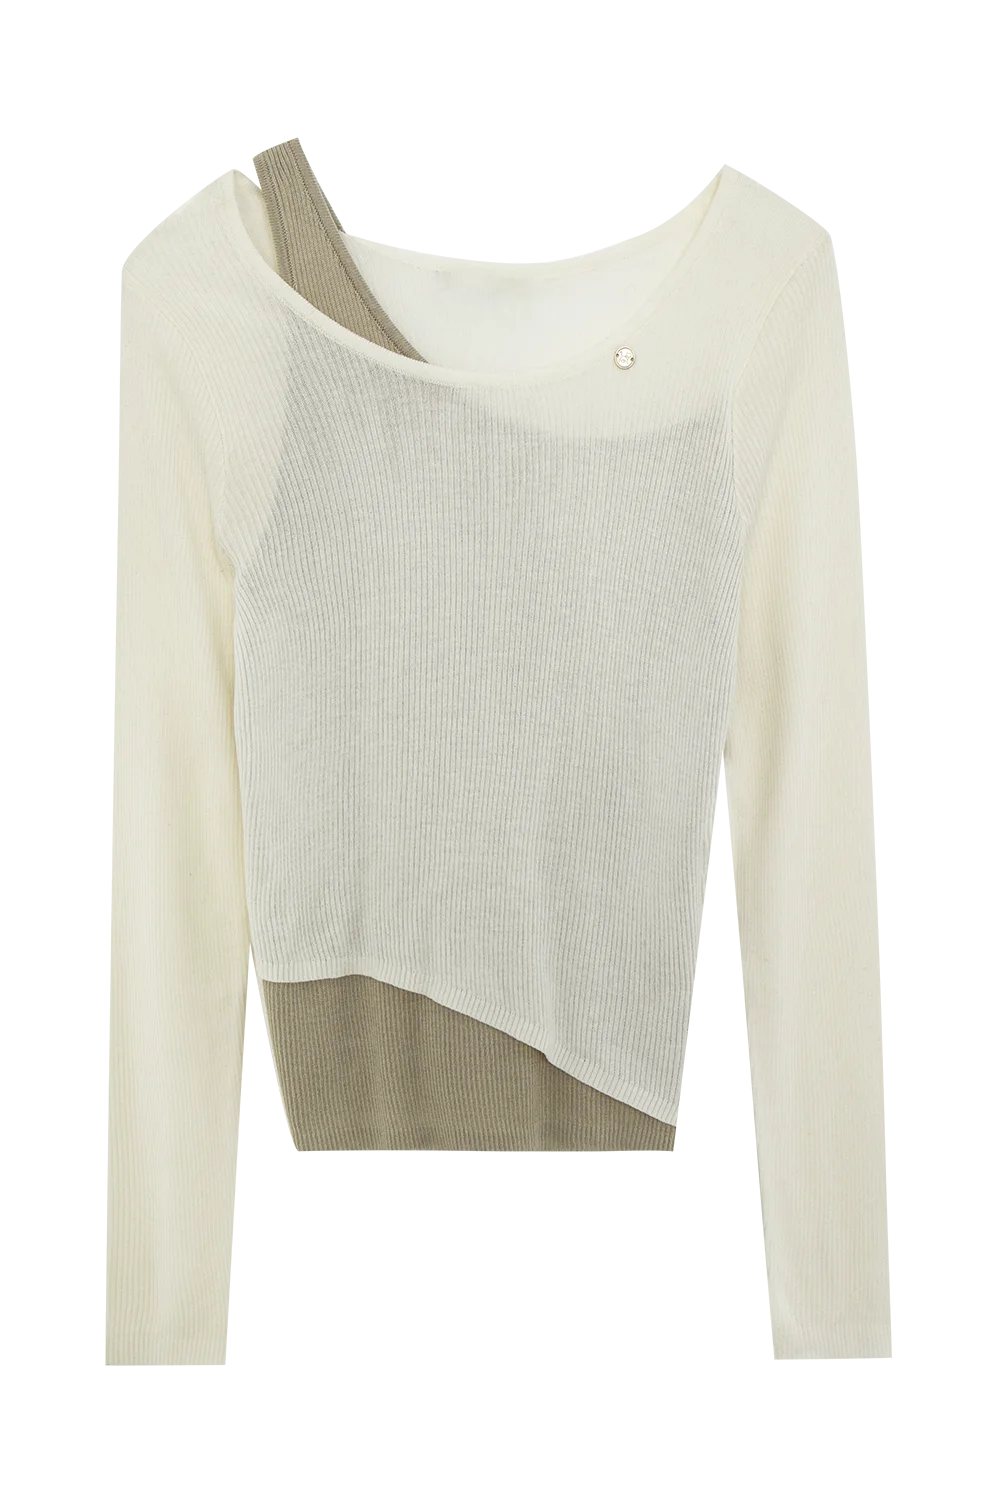 Soft Knit Pullover with Sleek Design and Versatile Style